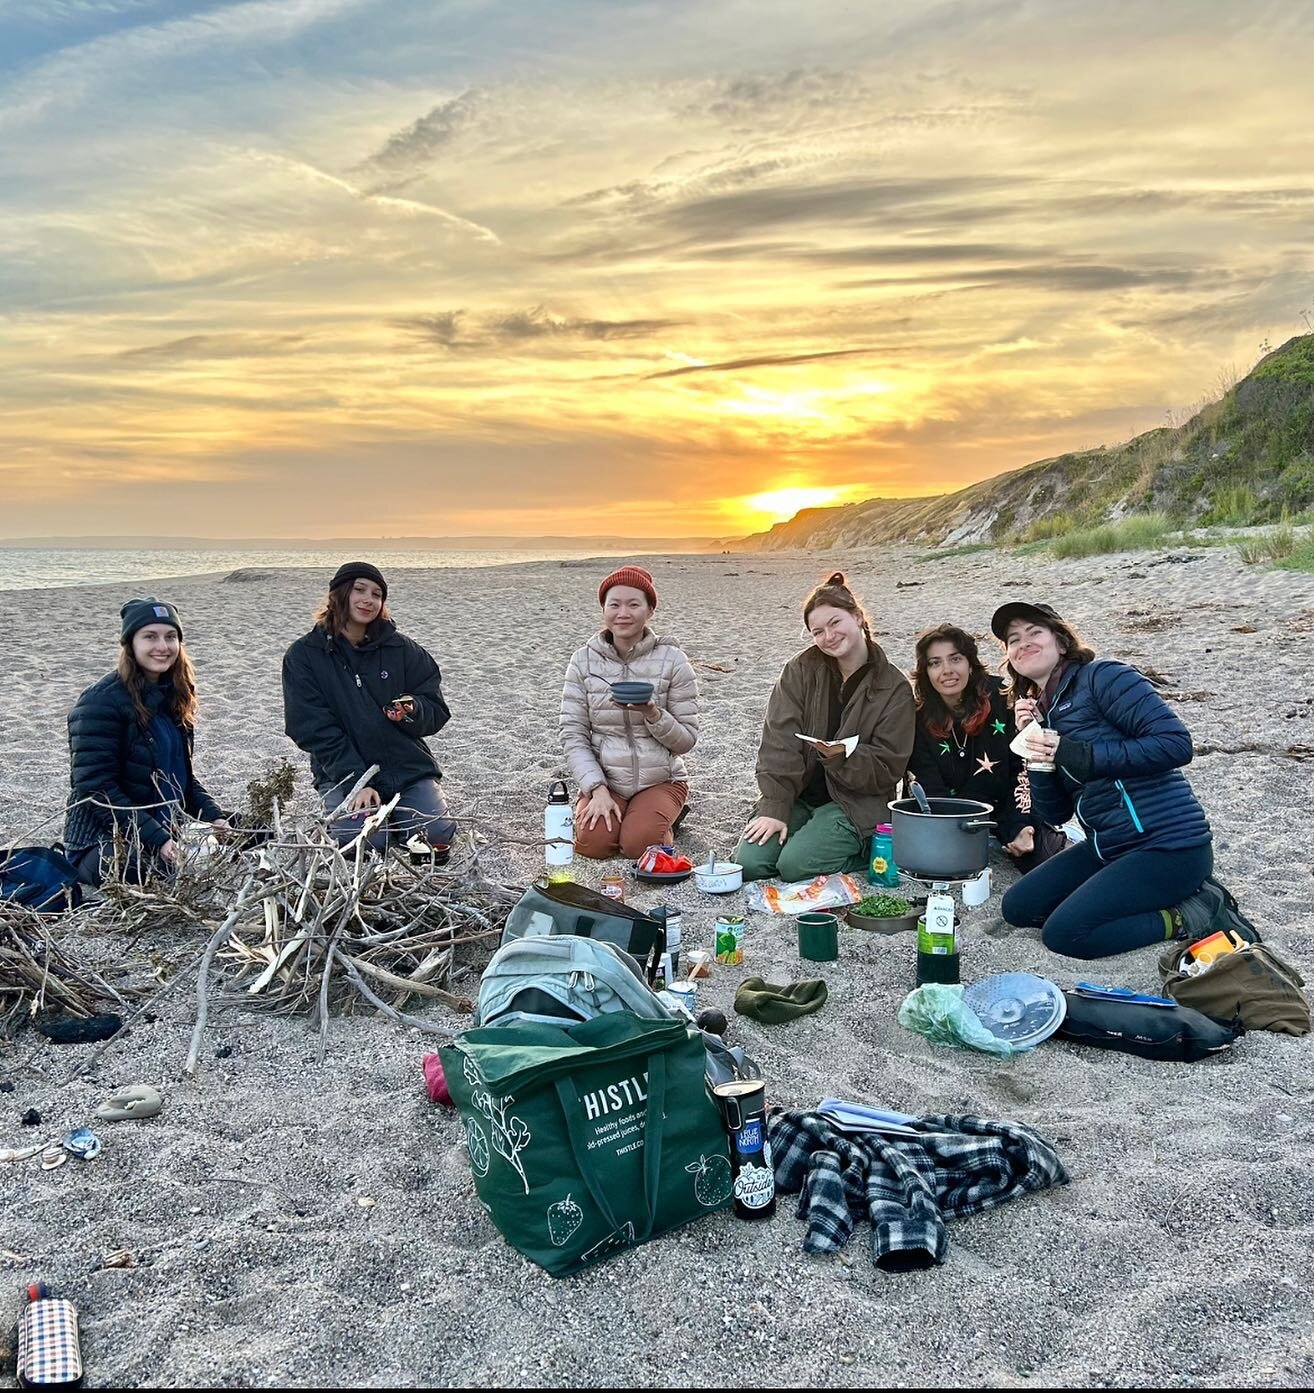 We came for the bioluminescence (which we saw and it was magical! ✨). We stayed for the good company and conversations, and left with renewed intentions. 💖🌱

So many gifts, including that sunset 🌅 #nofilter 

Lovely souls and new human and non-hum